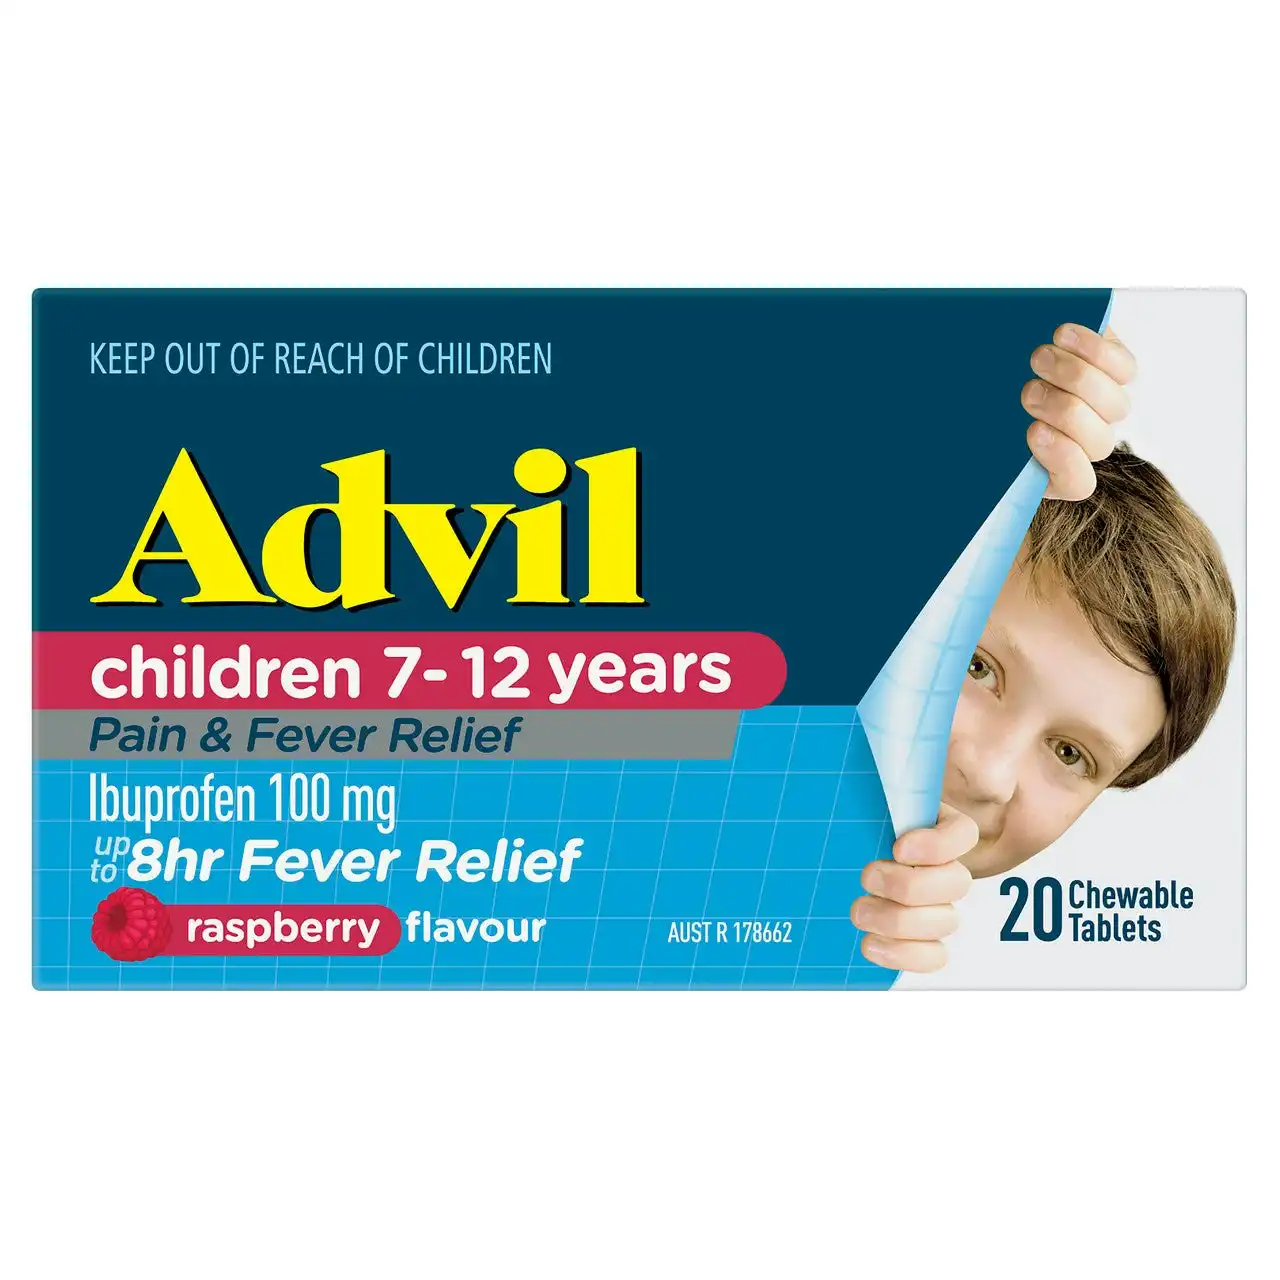 Advil Childrens 7-12 years 20 Chewable Tablets